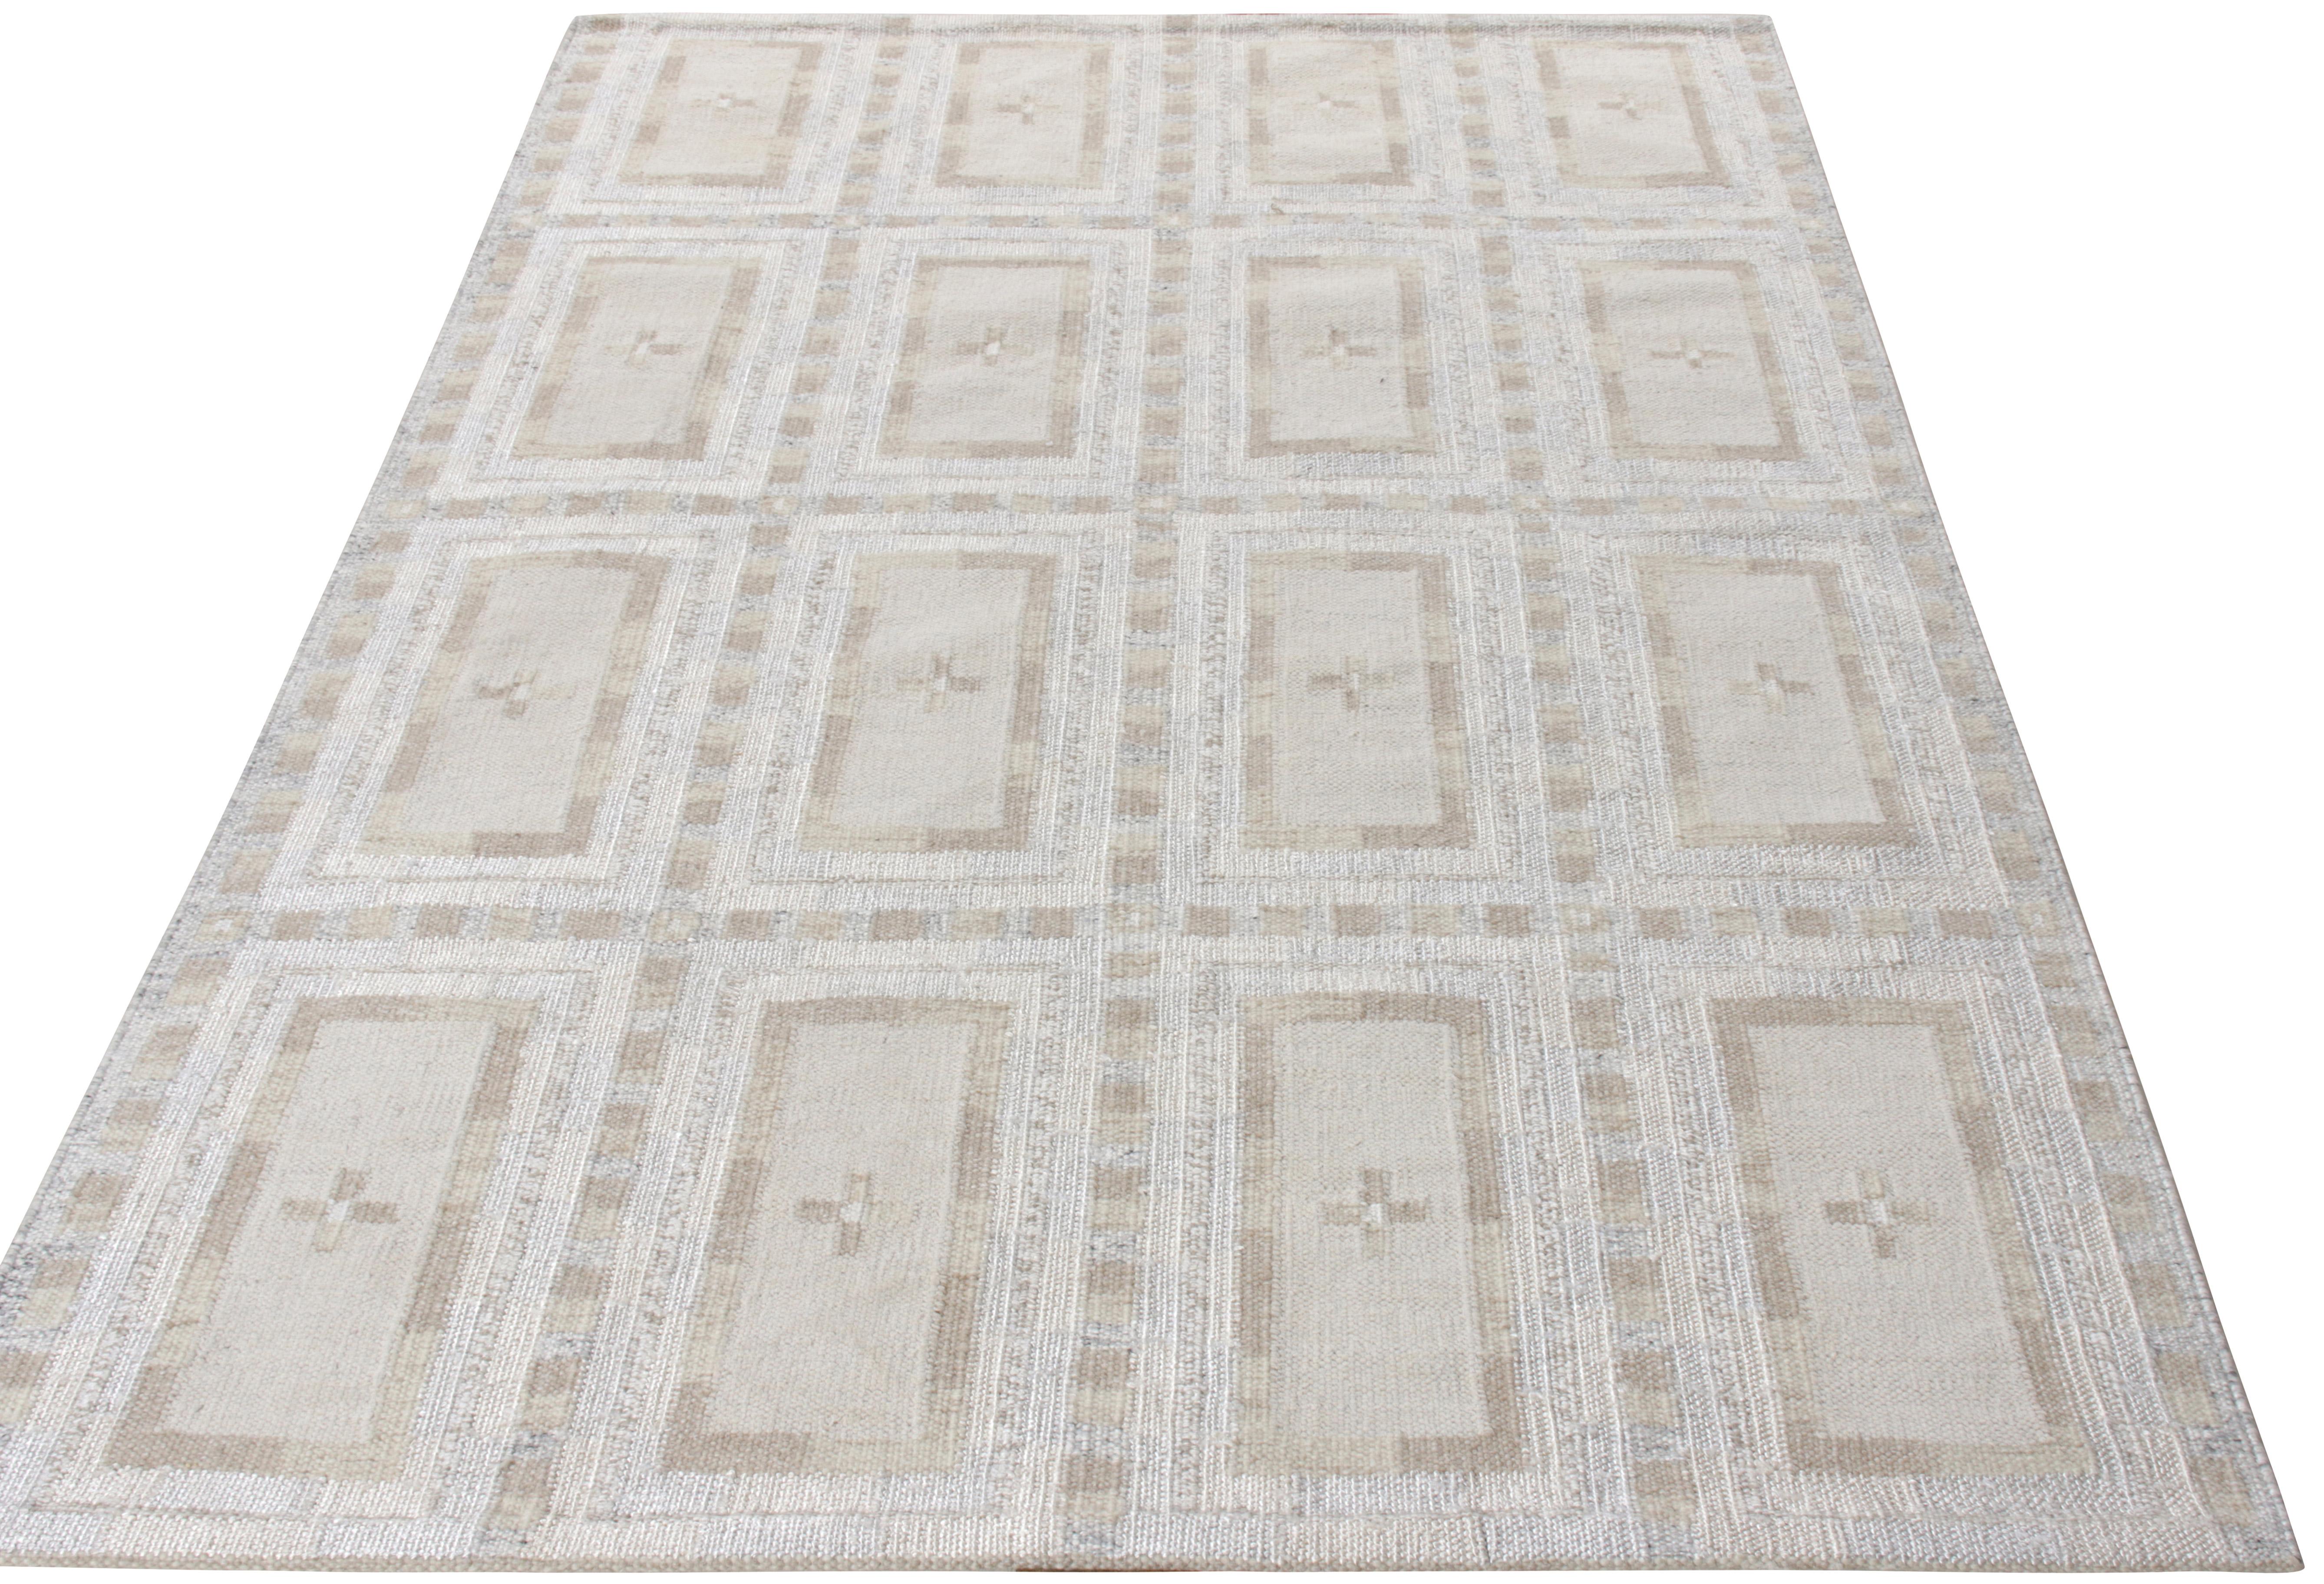 A 6x9 handwoven wool Kilim from Rug & Kilim’s award-winning Scandinavian flat weave collection. Flaunting a symmetric geometric design in beige, white and gray, the rug features an enticing sense of movement that makes a captivating appeal in